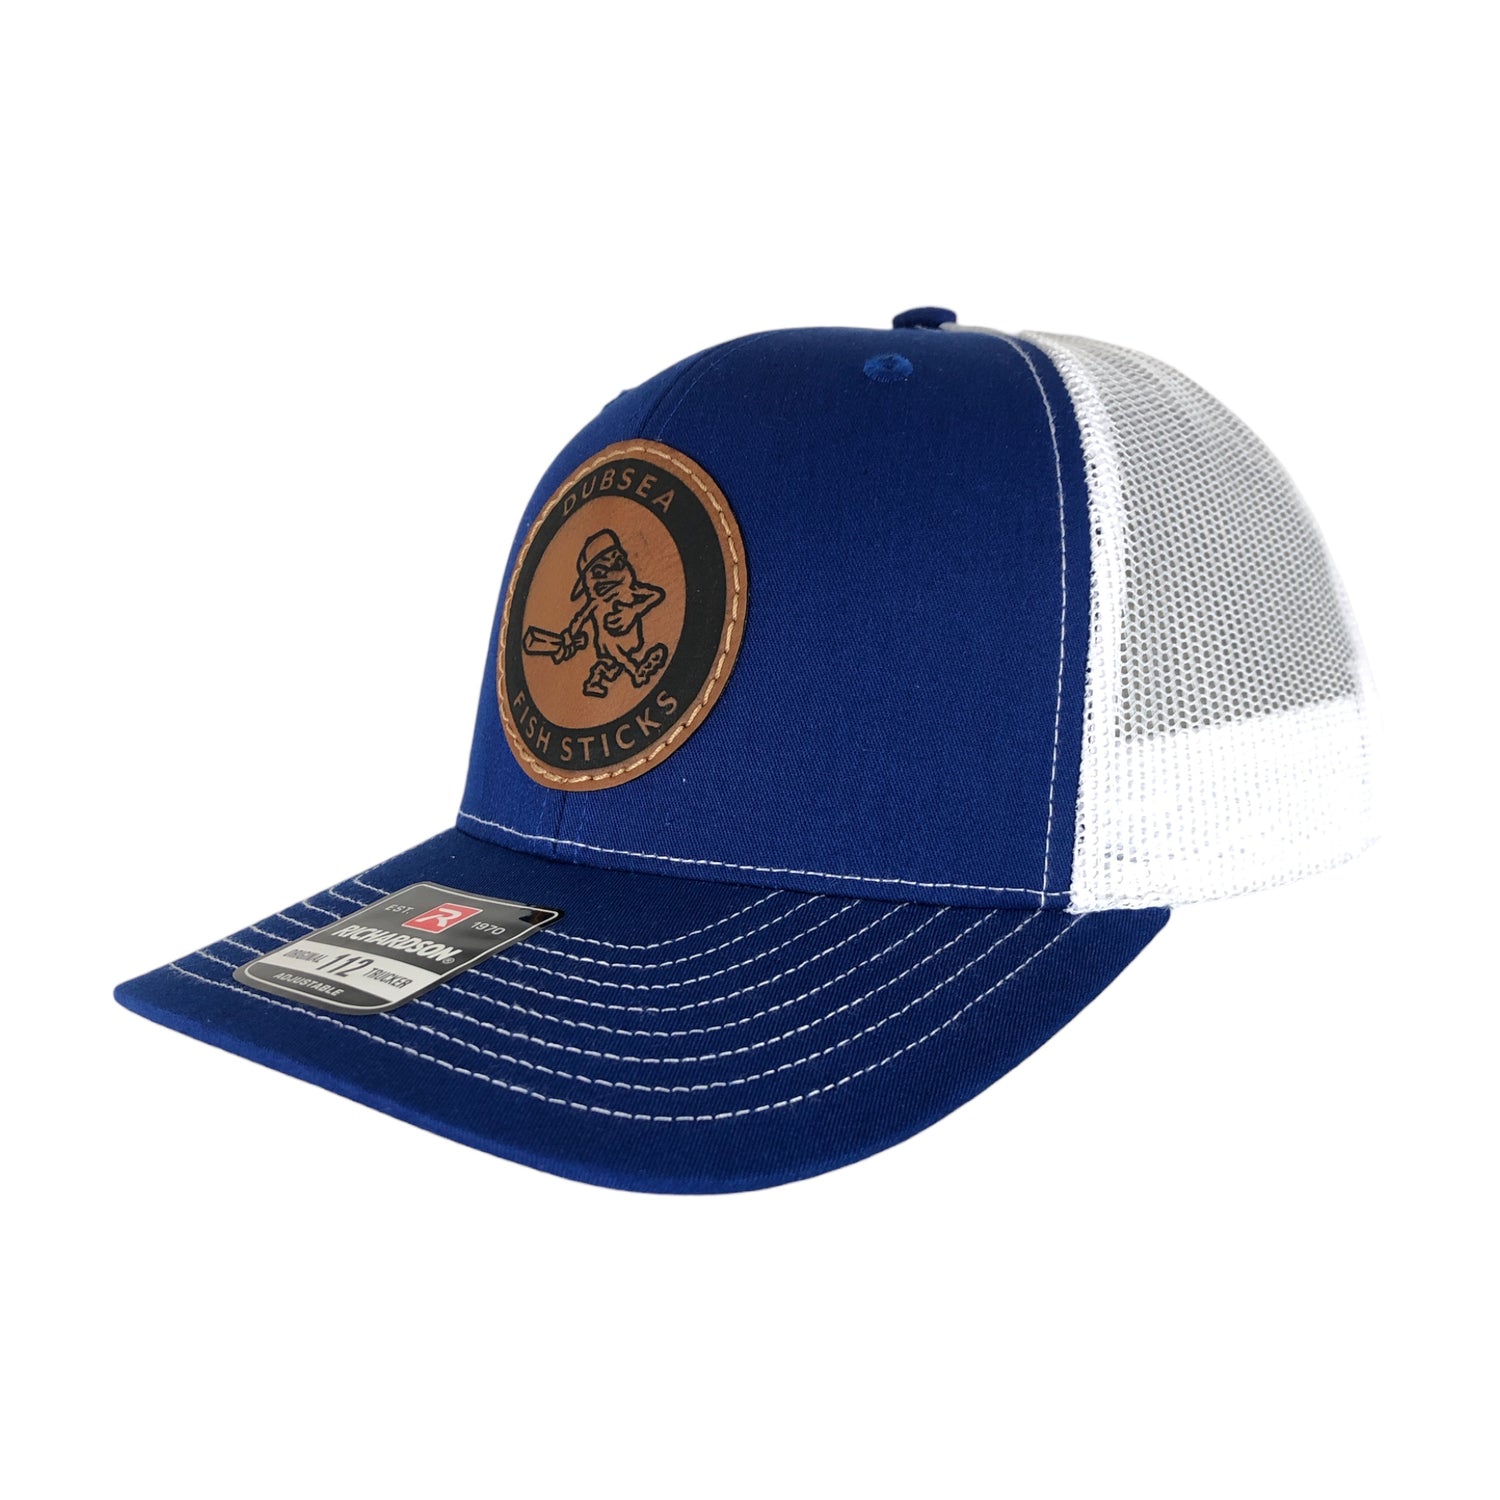 DubSea Fish Sticks royal and white leather patch, adjustable, Richardson 112 trucker hat.